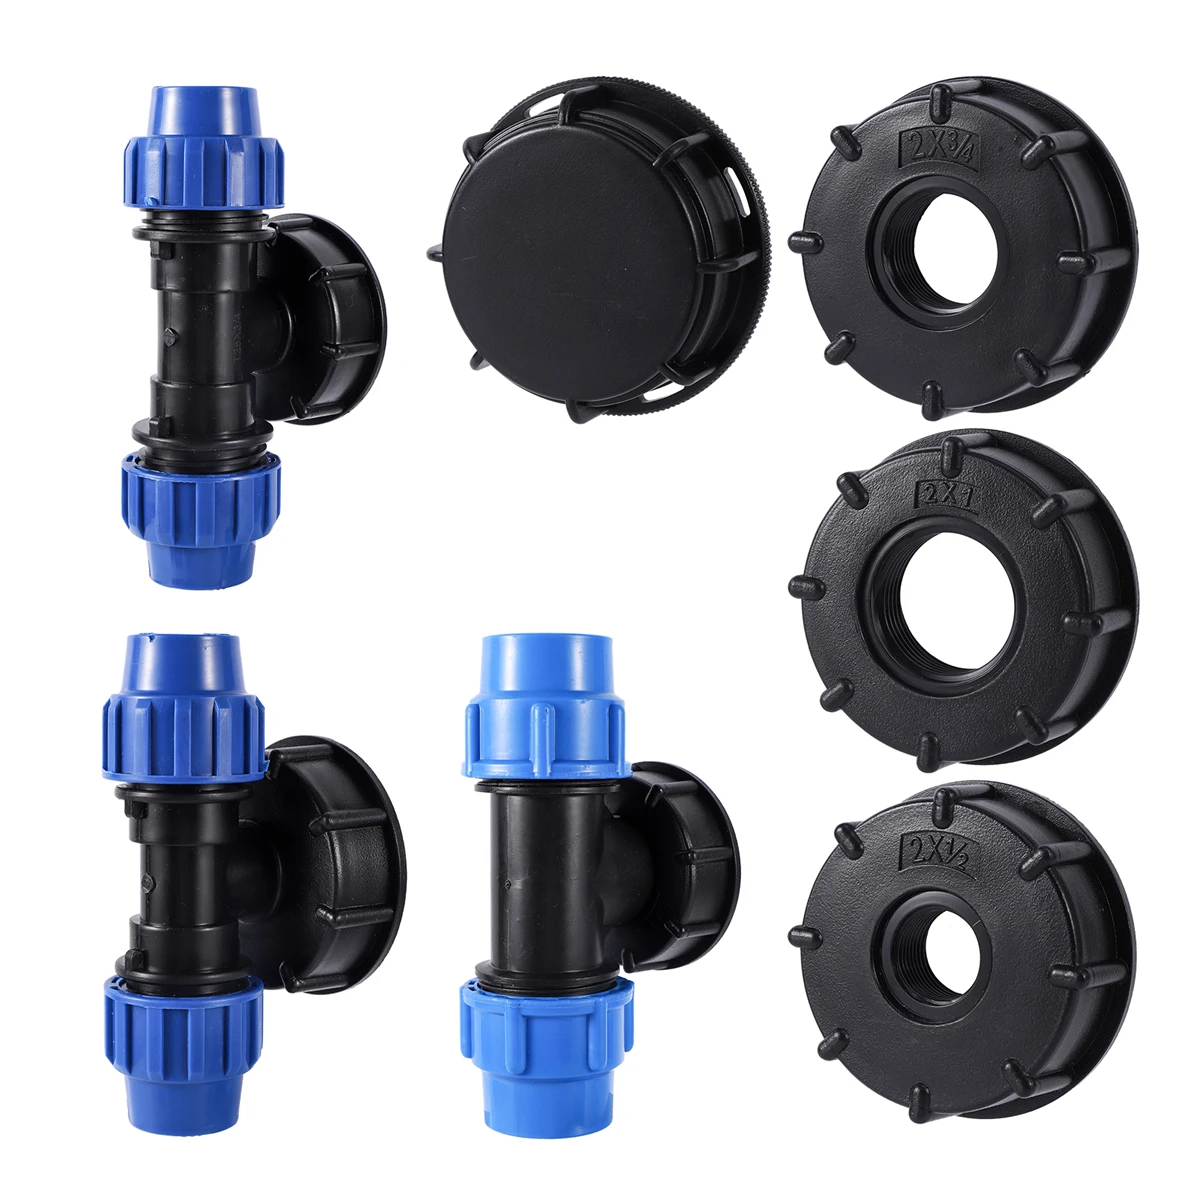 

20/25/32mm PE Tube Tee Connector S60 Coarse Female Thread Inlet Water Splitter IBC Water Tank Reducing Tee Irrigation Adapter